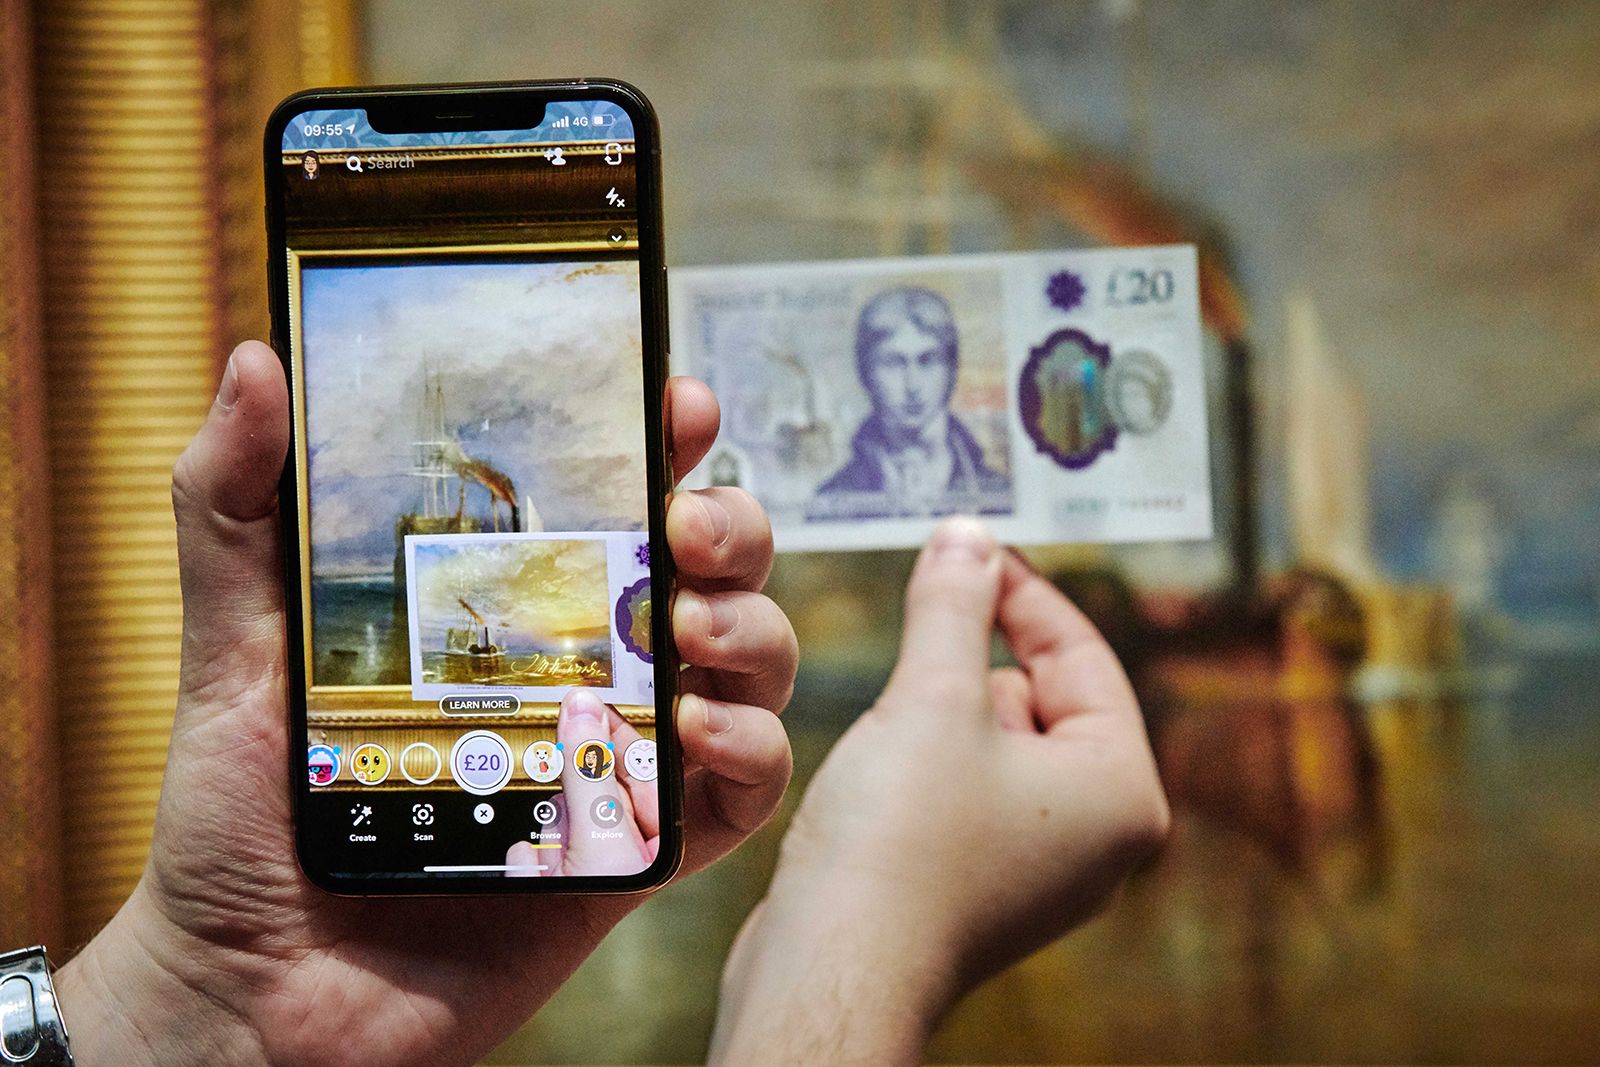 Snapchat Filter Brings New £20 Note To Life Animating Turners Paintings In Ar image 1